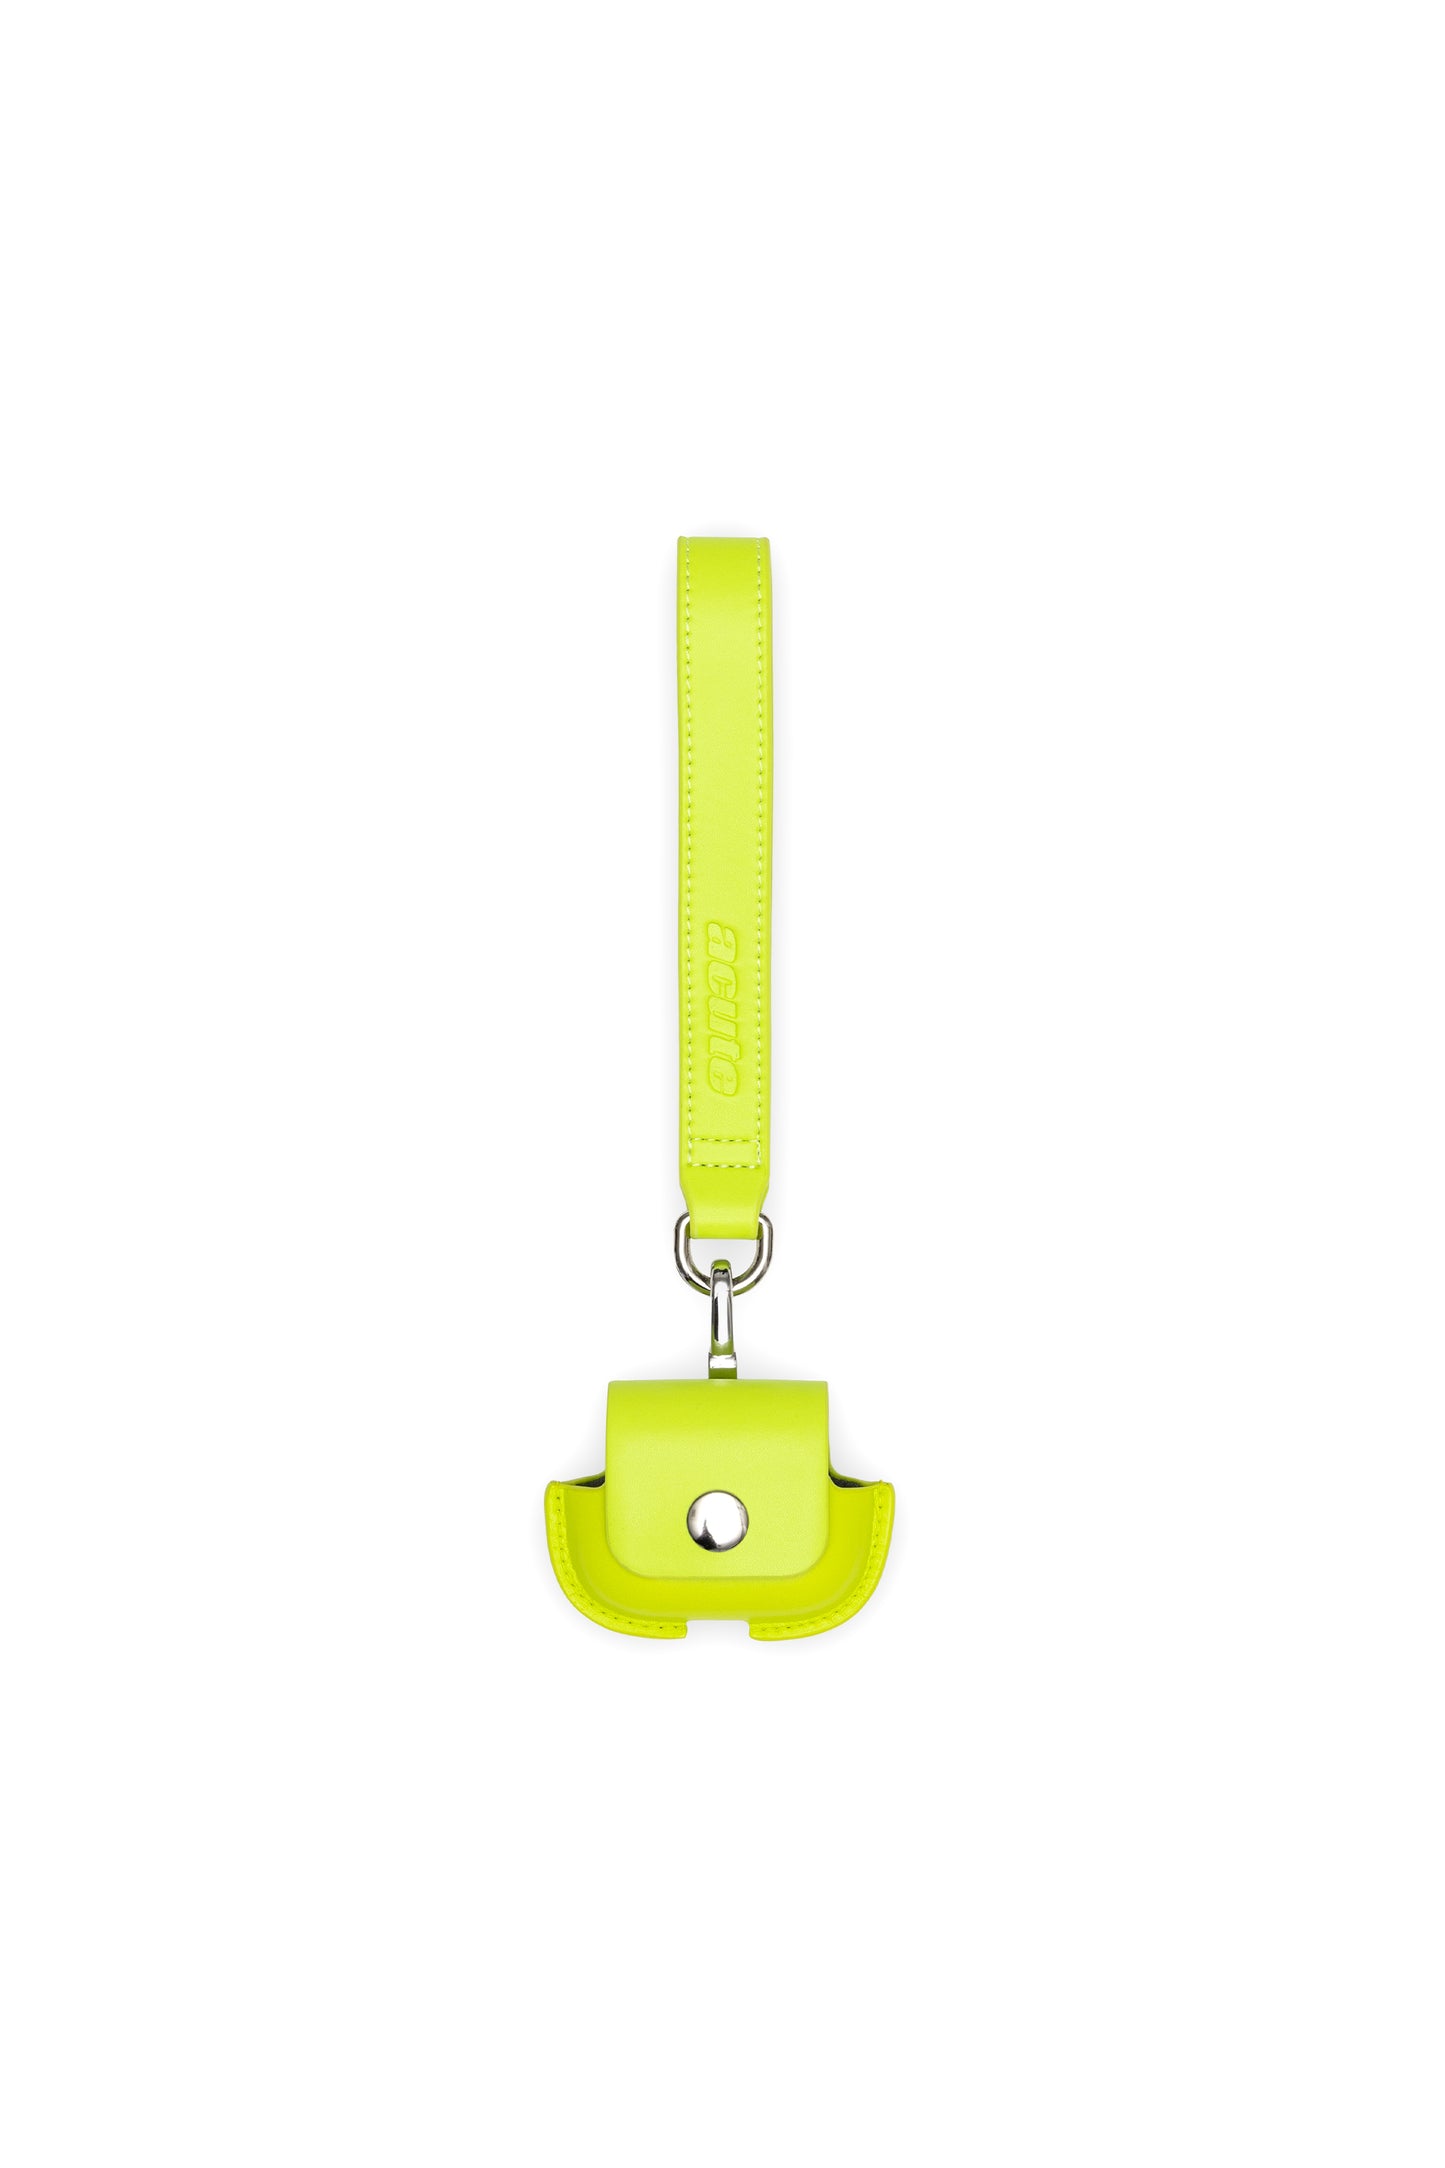 AirPods Case in Chartreuse